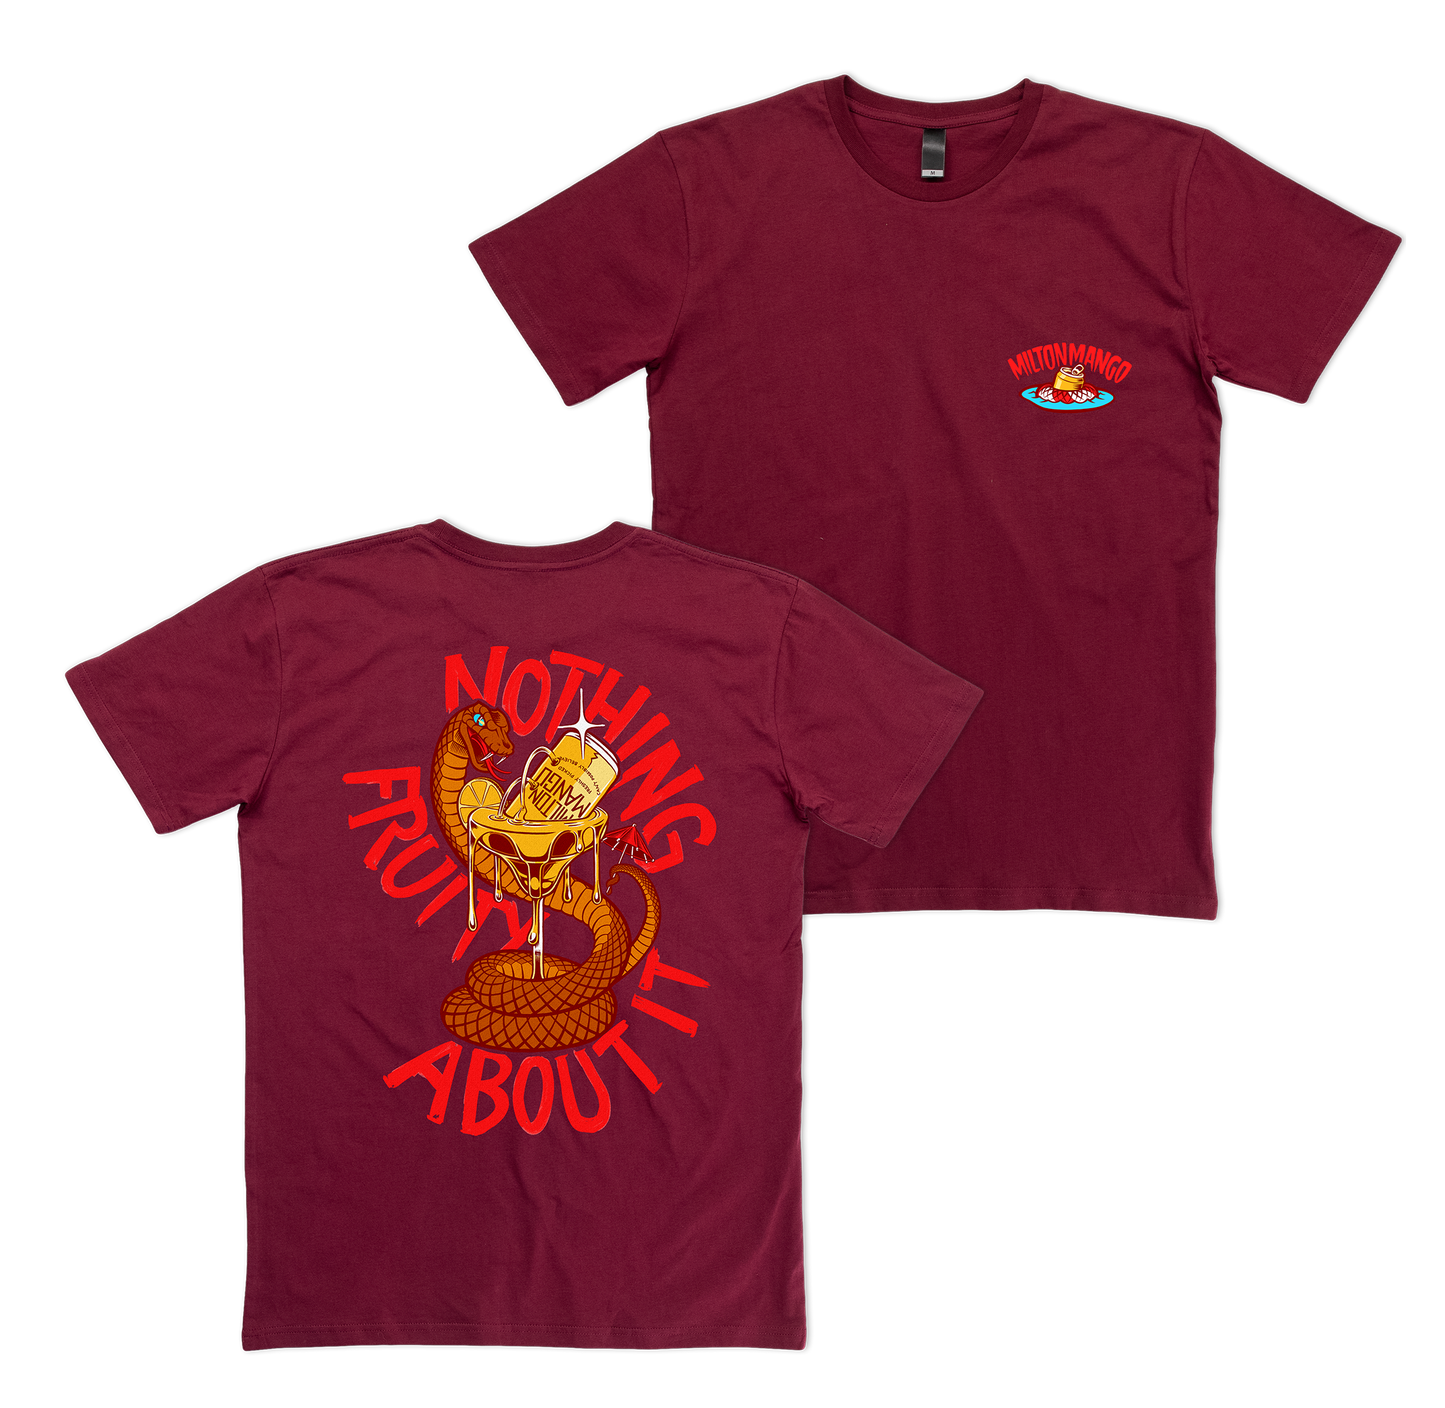 Nothin' Fruity About It Tee Burgundy